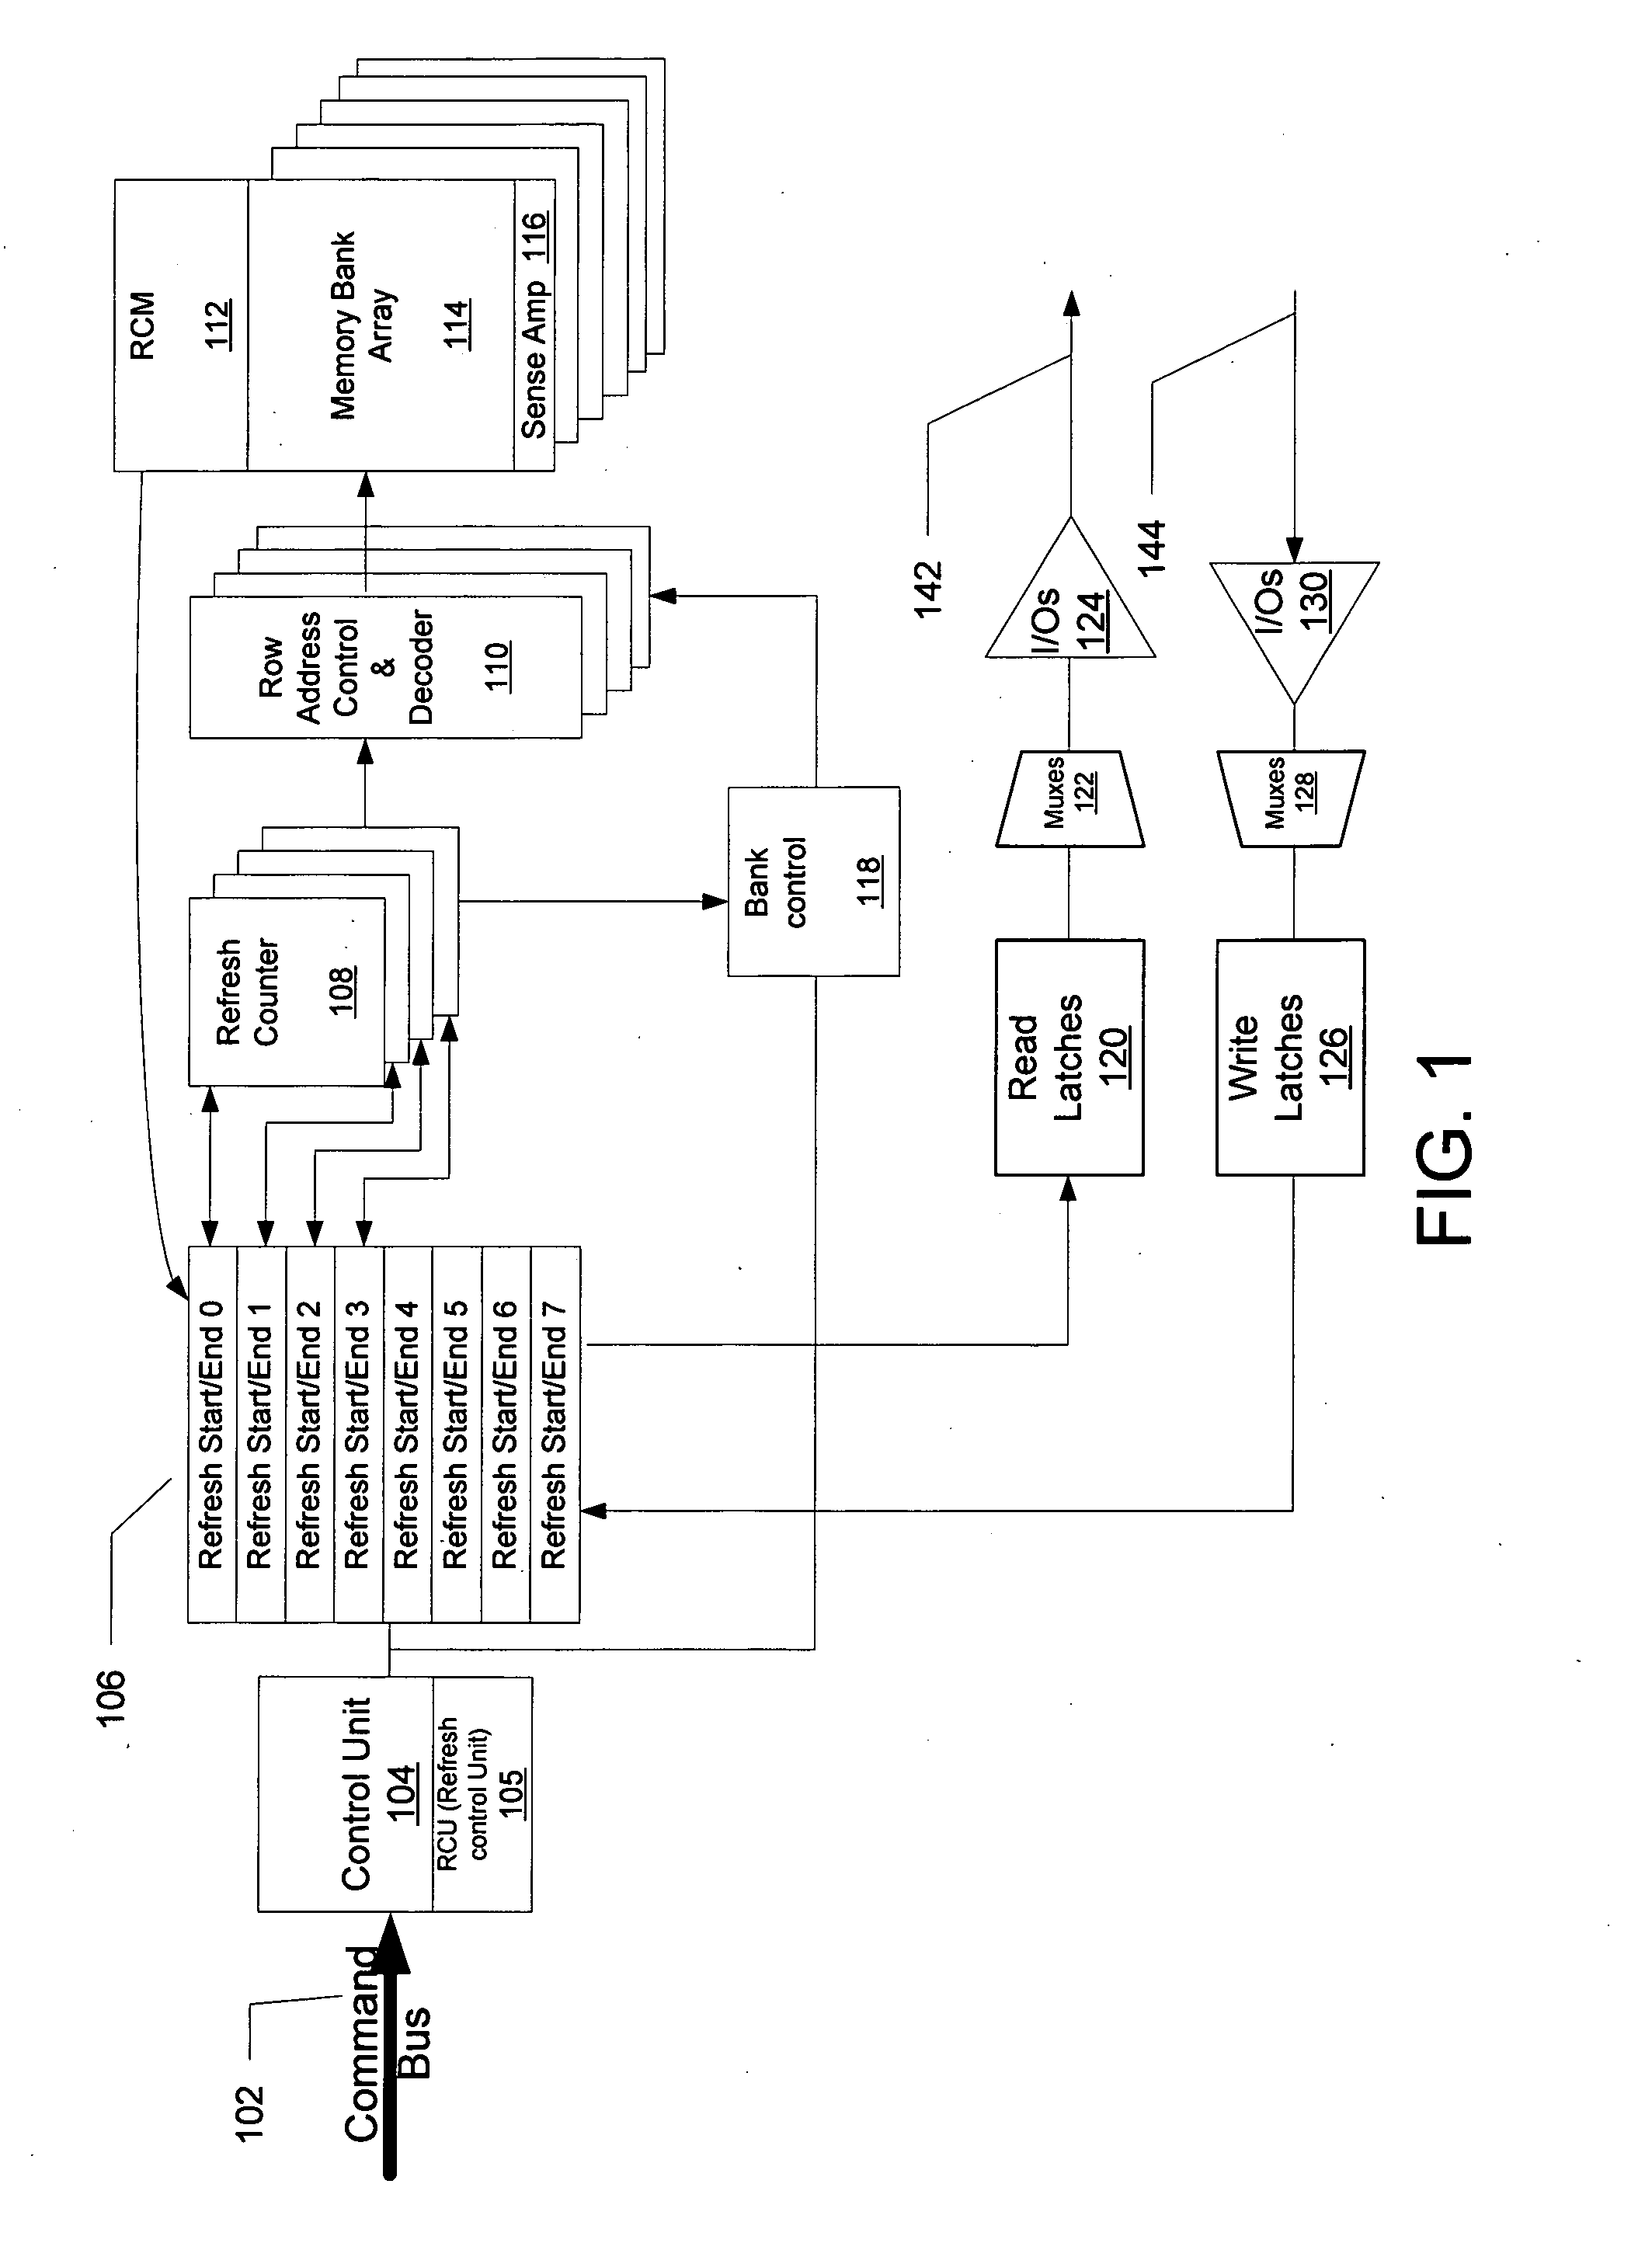 Method, apparatus, and system for active refresh management